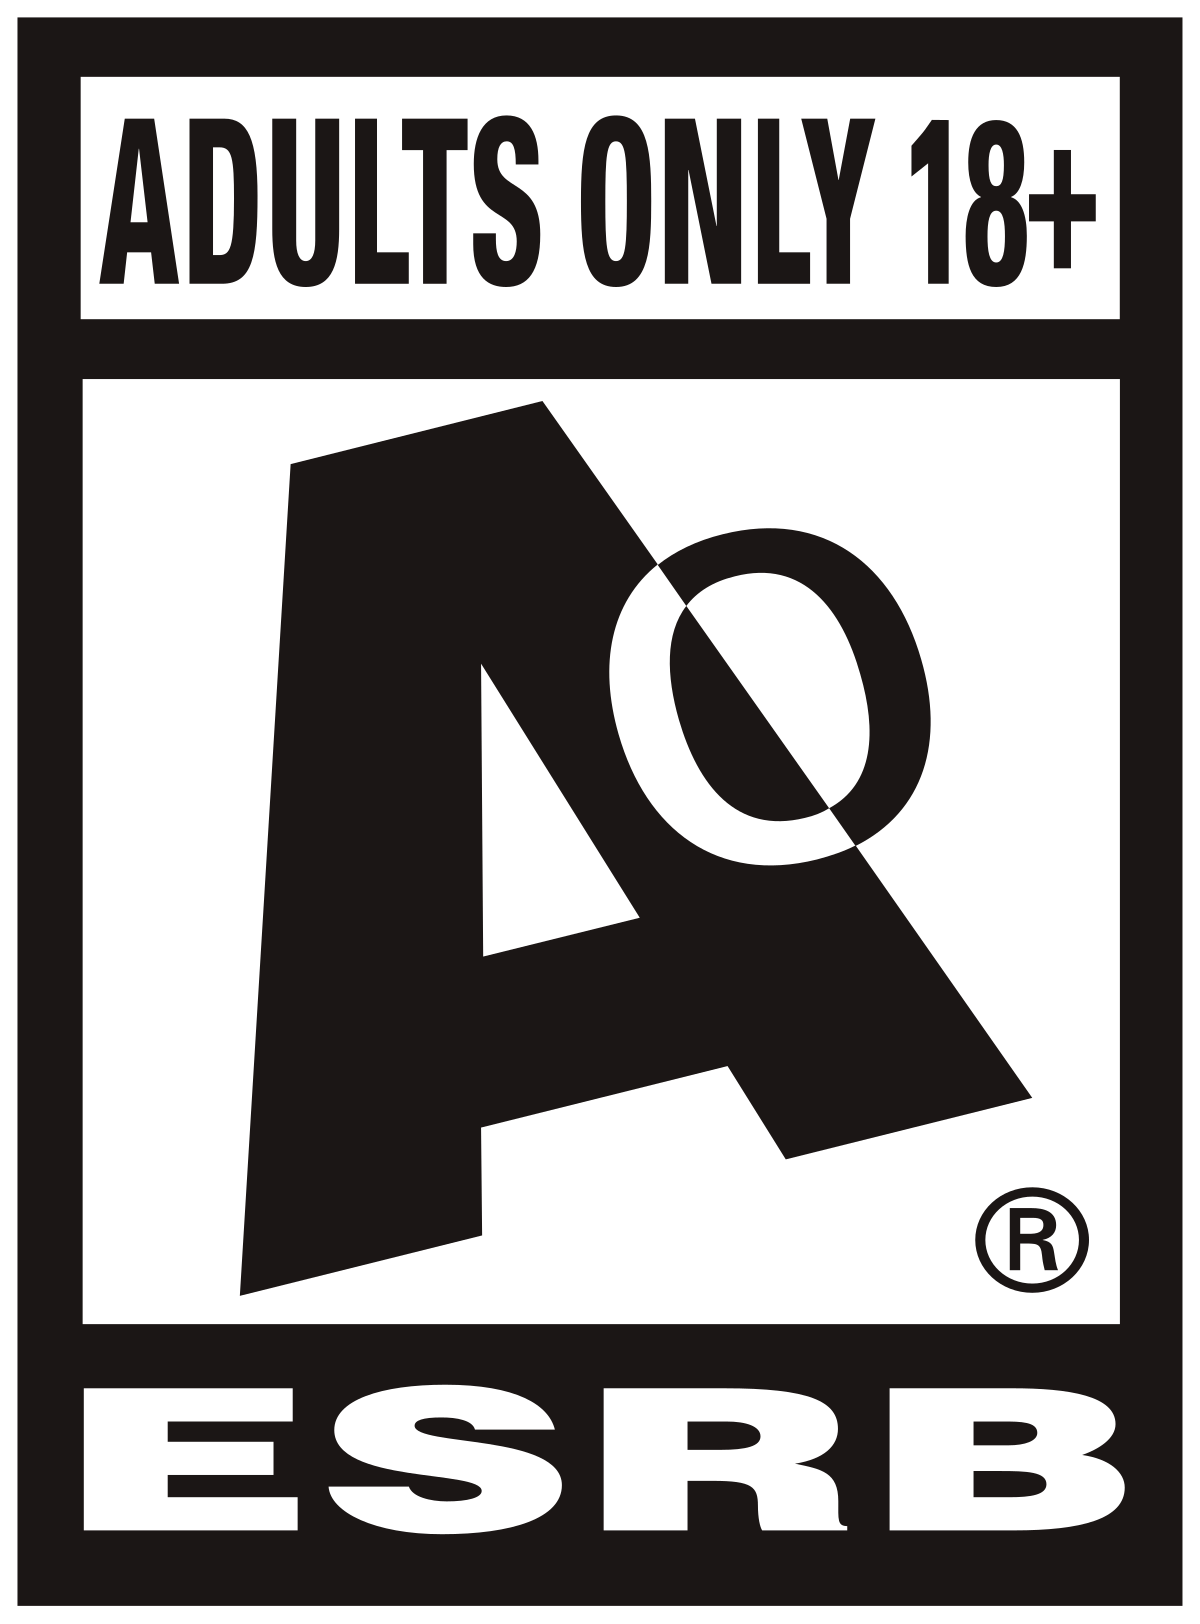 ESRB Logo - List of AO-rated video games